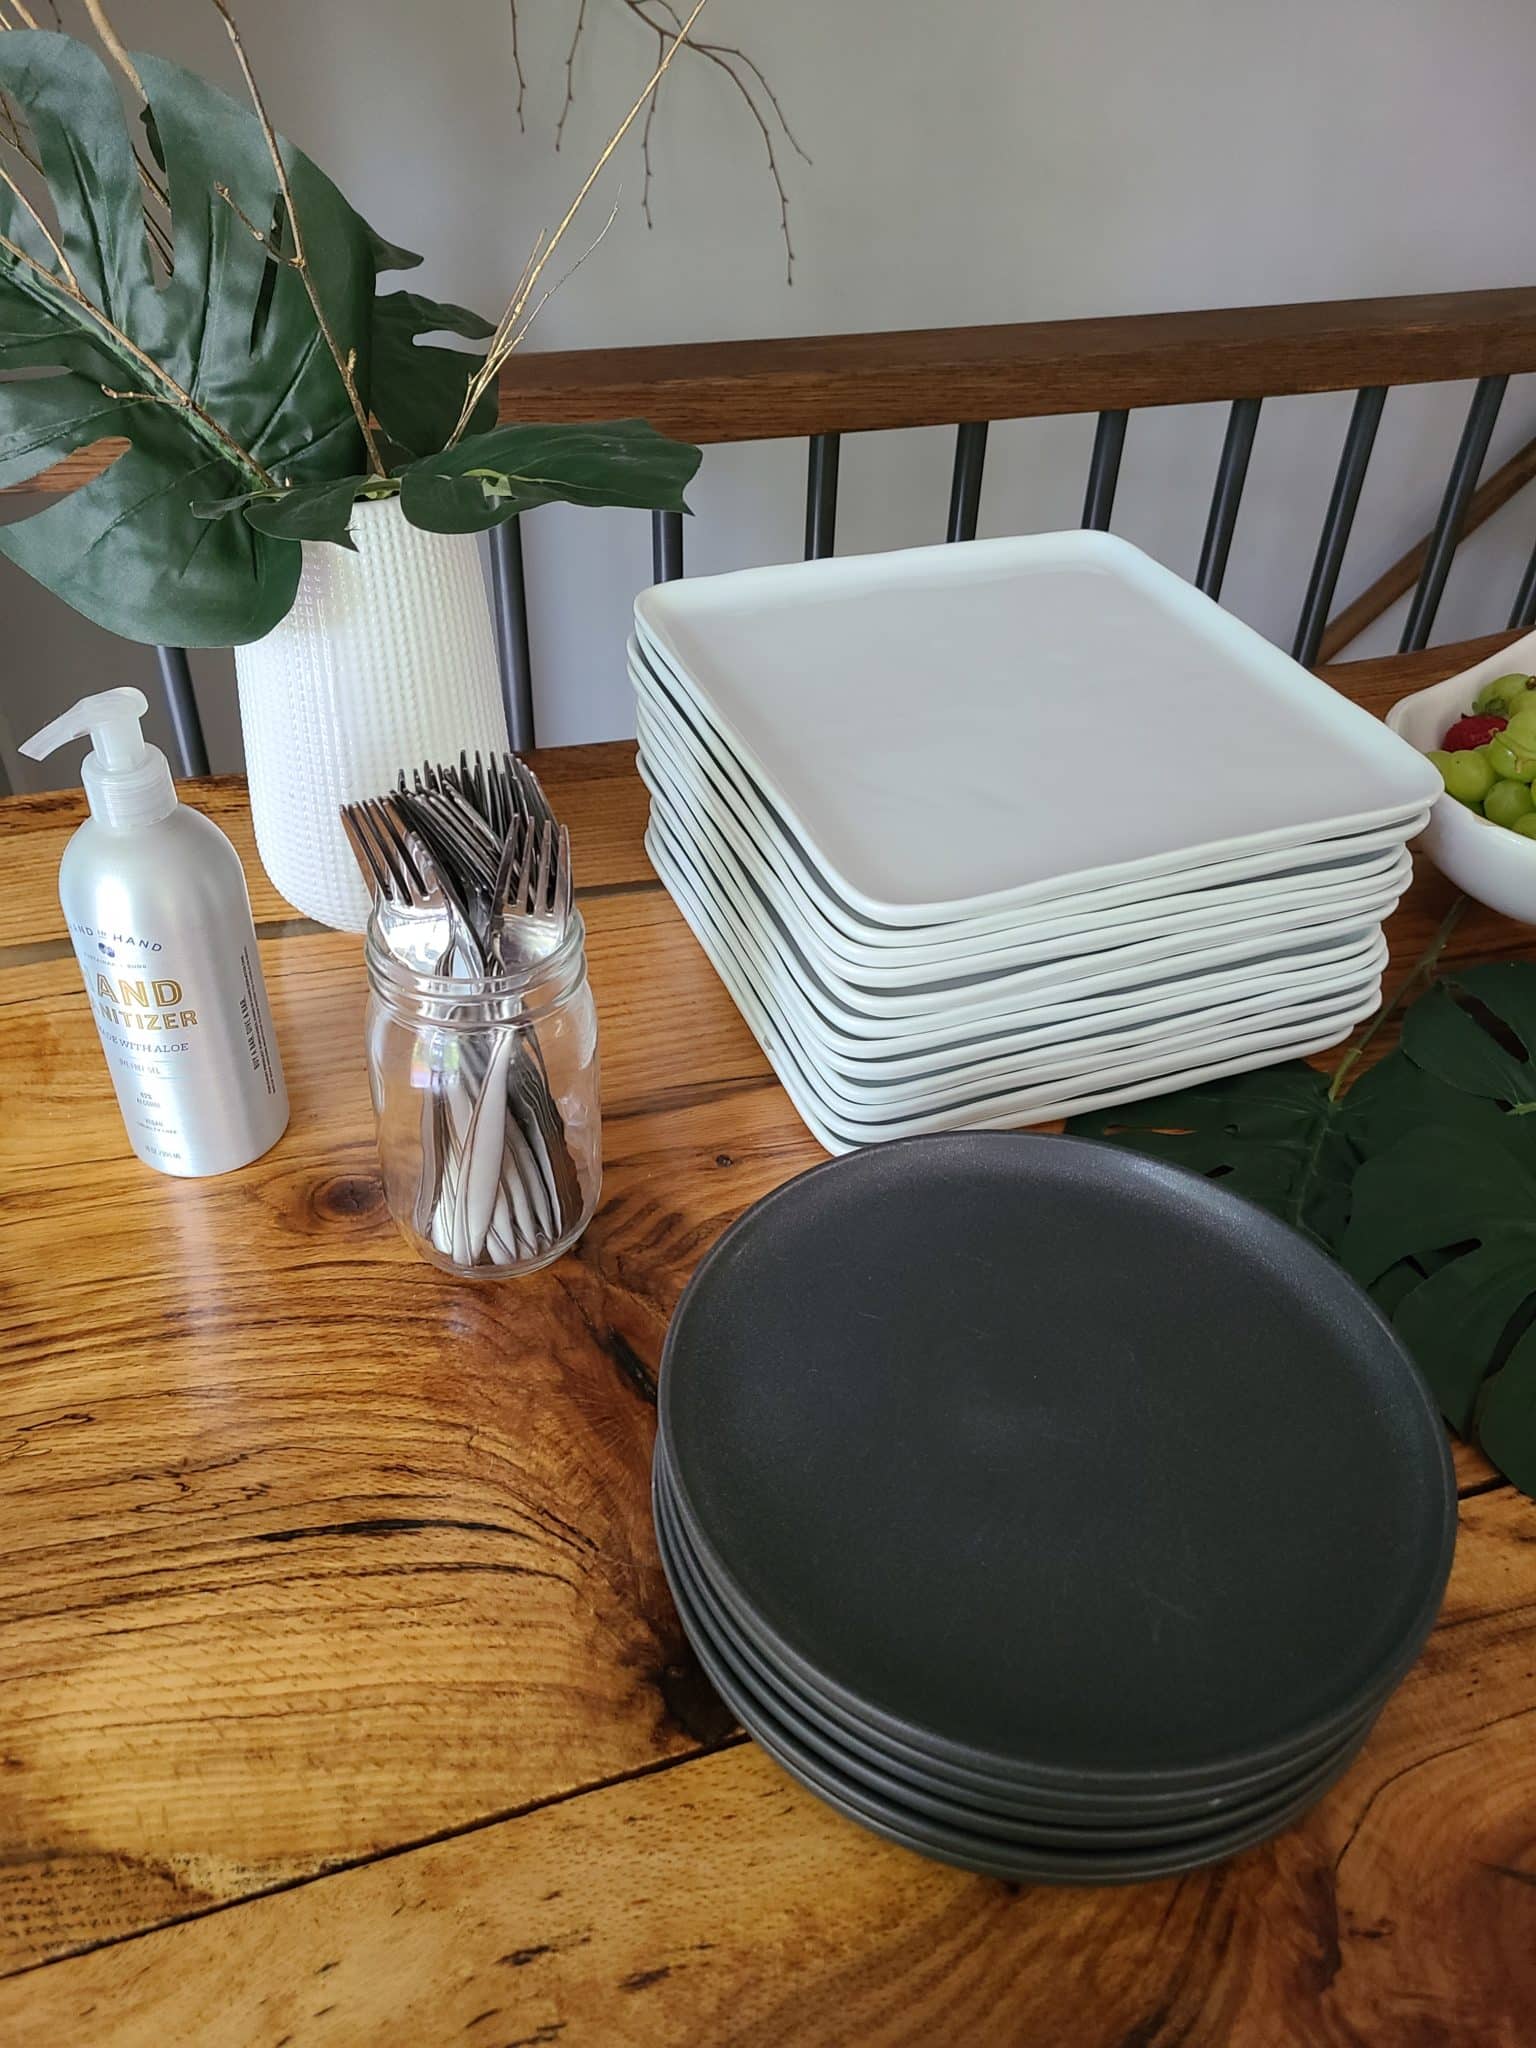 Eco-friendly party ideas and tips - use your dishes